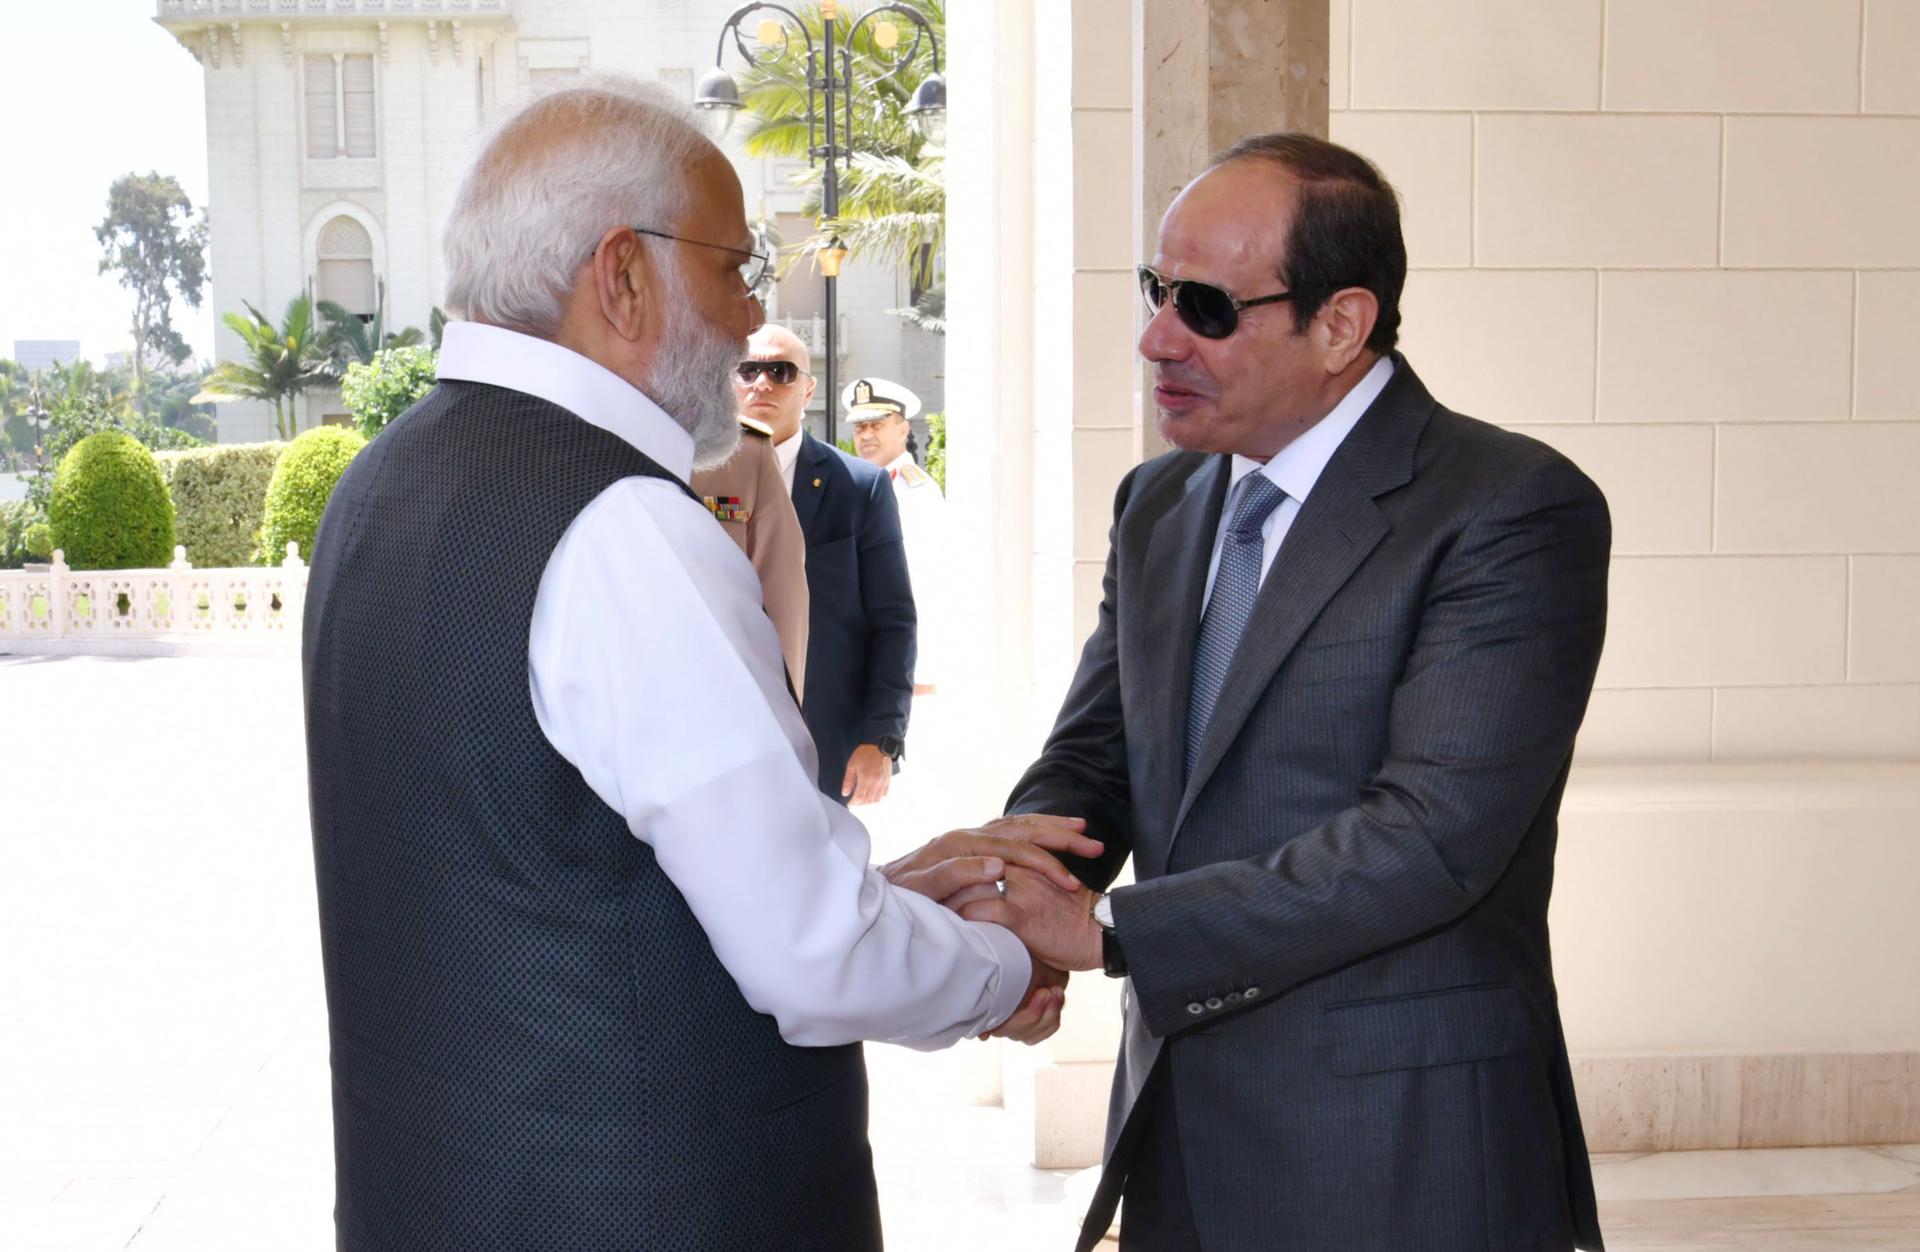 A handout photo made available by Egyptian presidential office shows Egyptian President Abdul Fattah al-Sisi (R) welcomes Indian Prime Minister Narendra Modi, in Cairo, Egypt, 25 June 2023. EFE-EPA/EGYPTIAN PRESIDENTIAL OFFICE HANDOUT HANDOUT EDITORIAL USE ONLY/NO SALES
